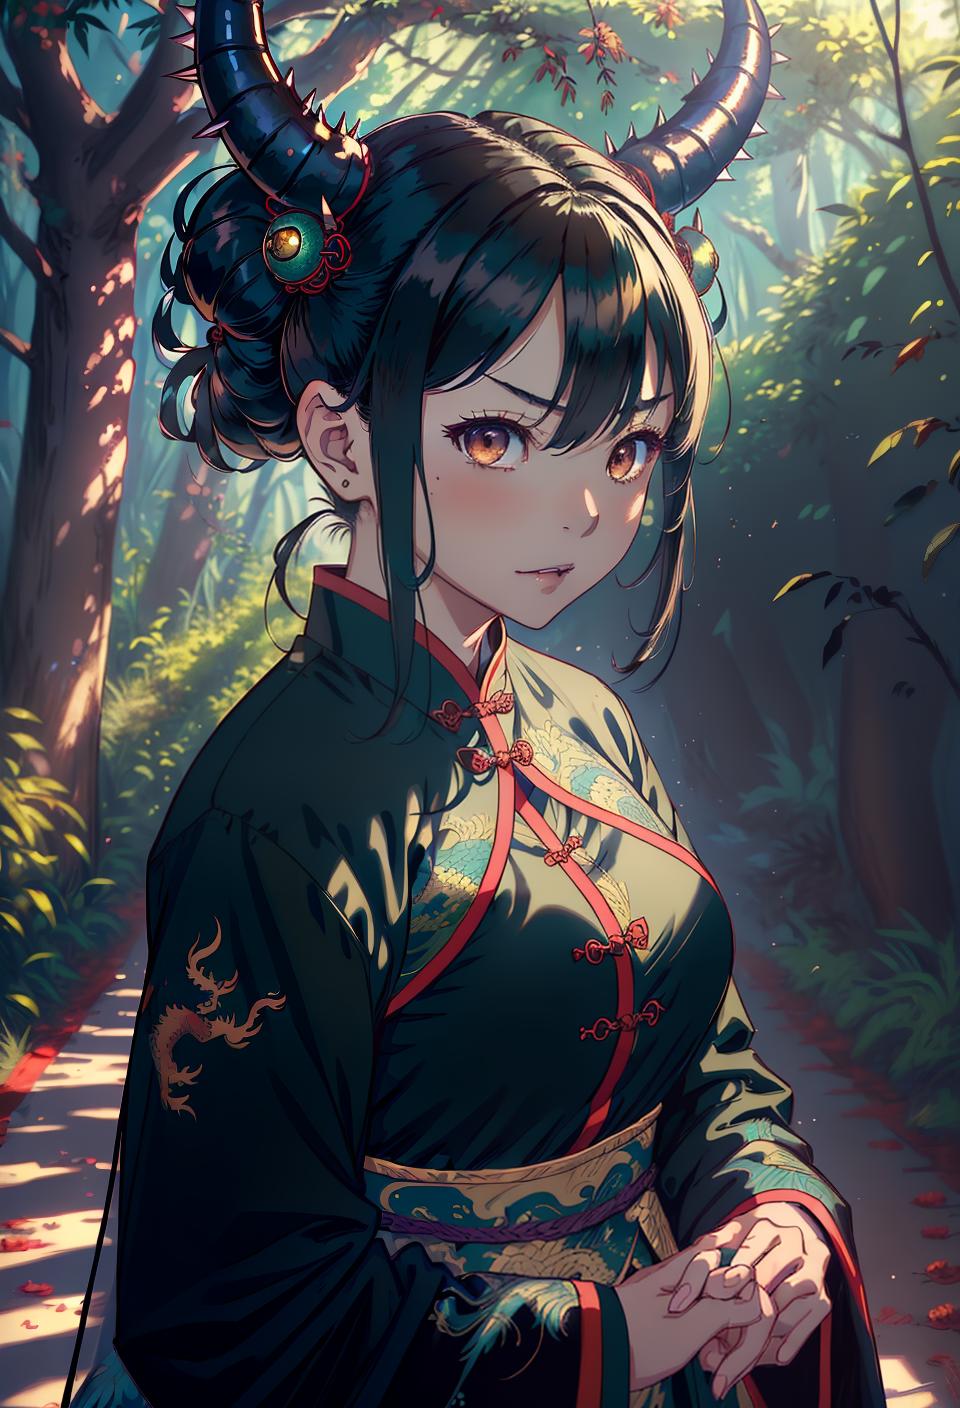  ((trending, highres, masterpiece, cinematic shot)), 1girl, mature, female chinese outfit, large, forest scene, very short spiked aqua hair, twintails hairstyle, large brown eyes, evil personality, mischievous expression, dragon horns, dragon wings, tanned skin, orderly, observant